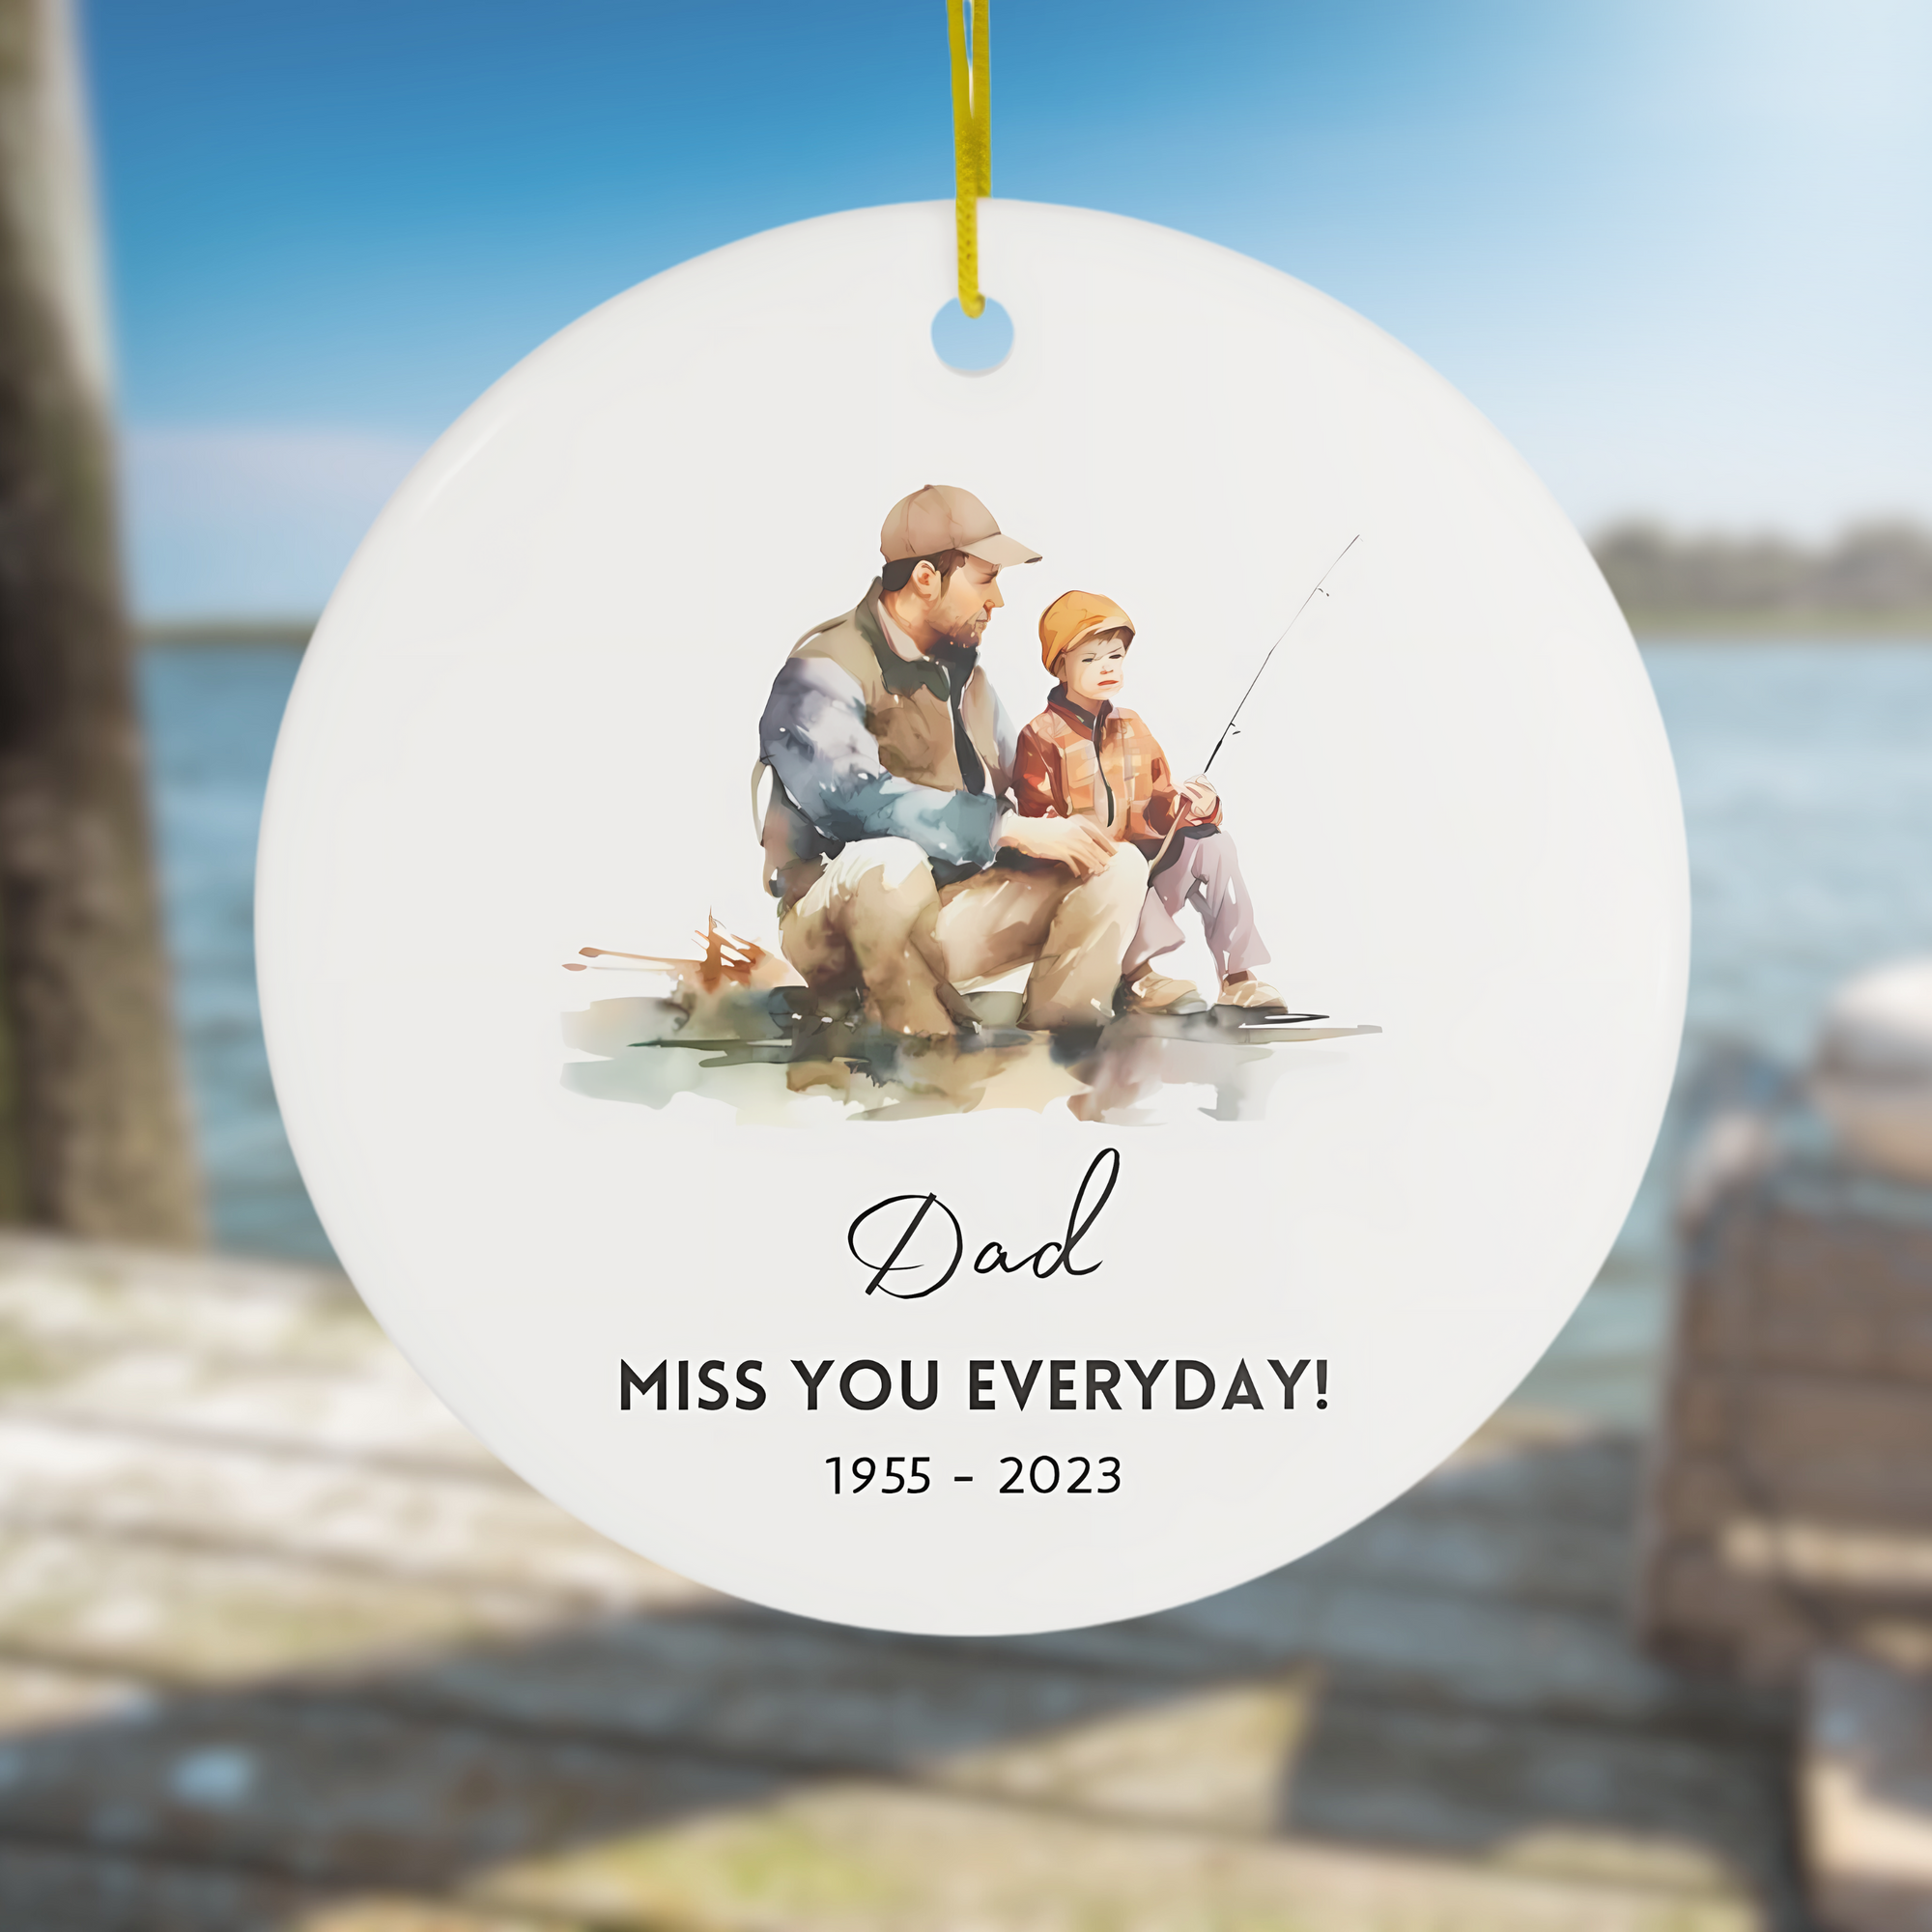 Personalized Ceramic Ornament, Dad Everyday